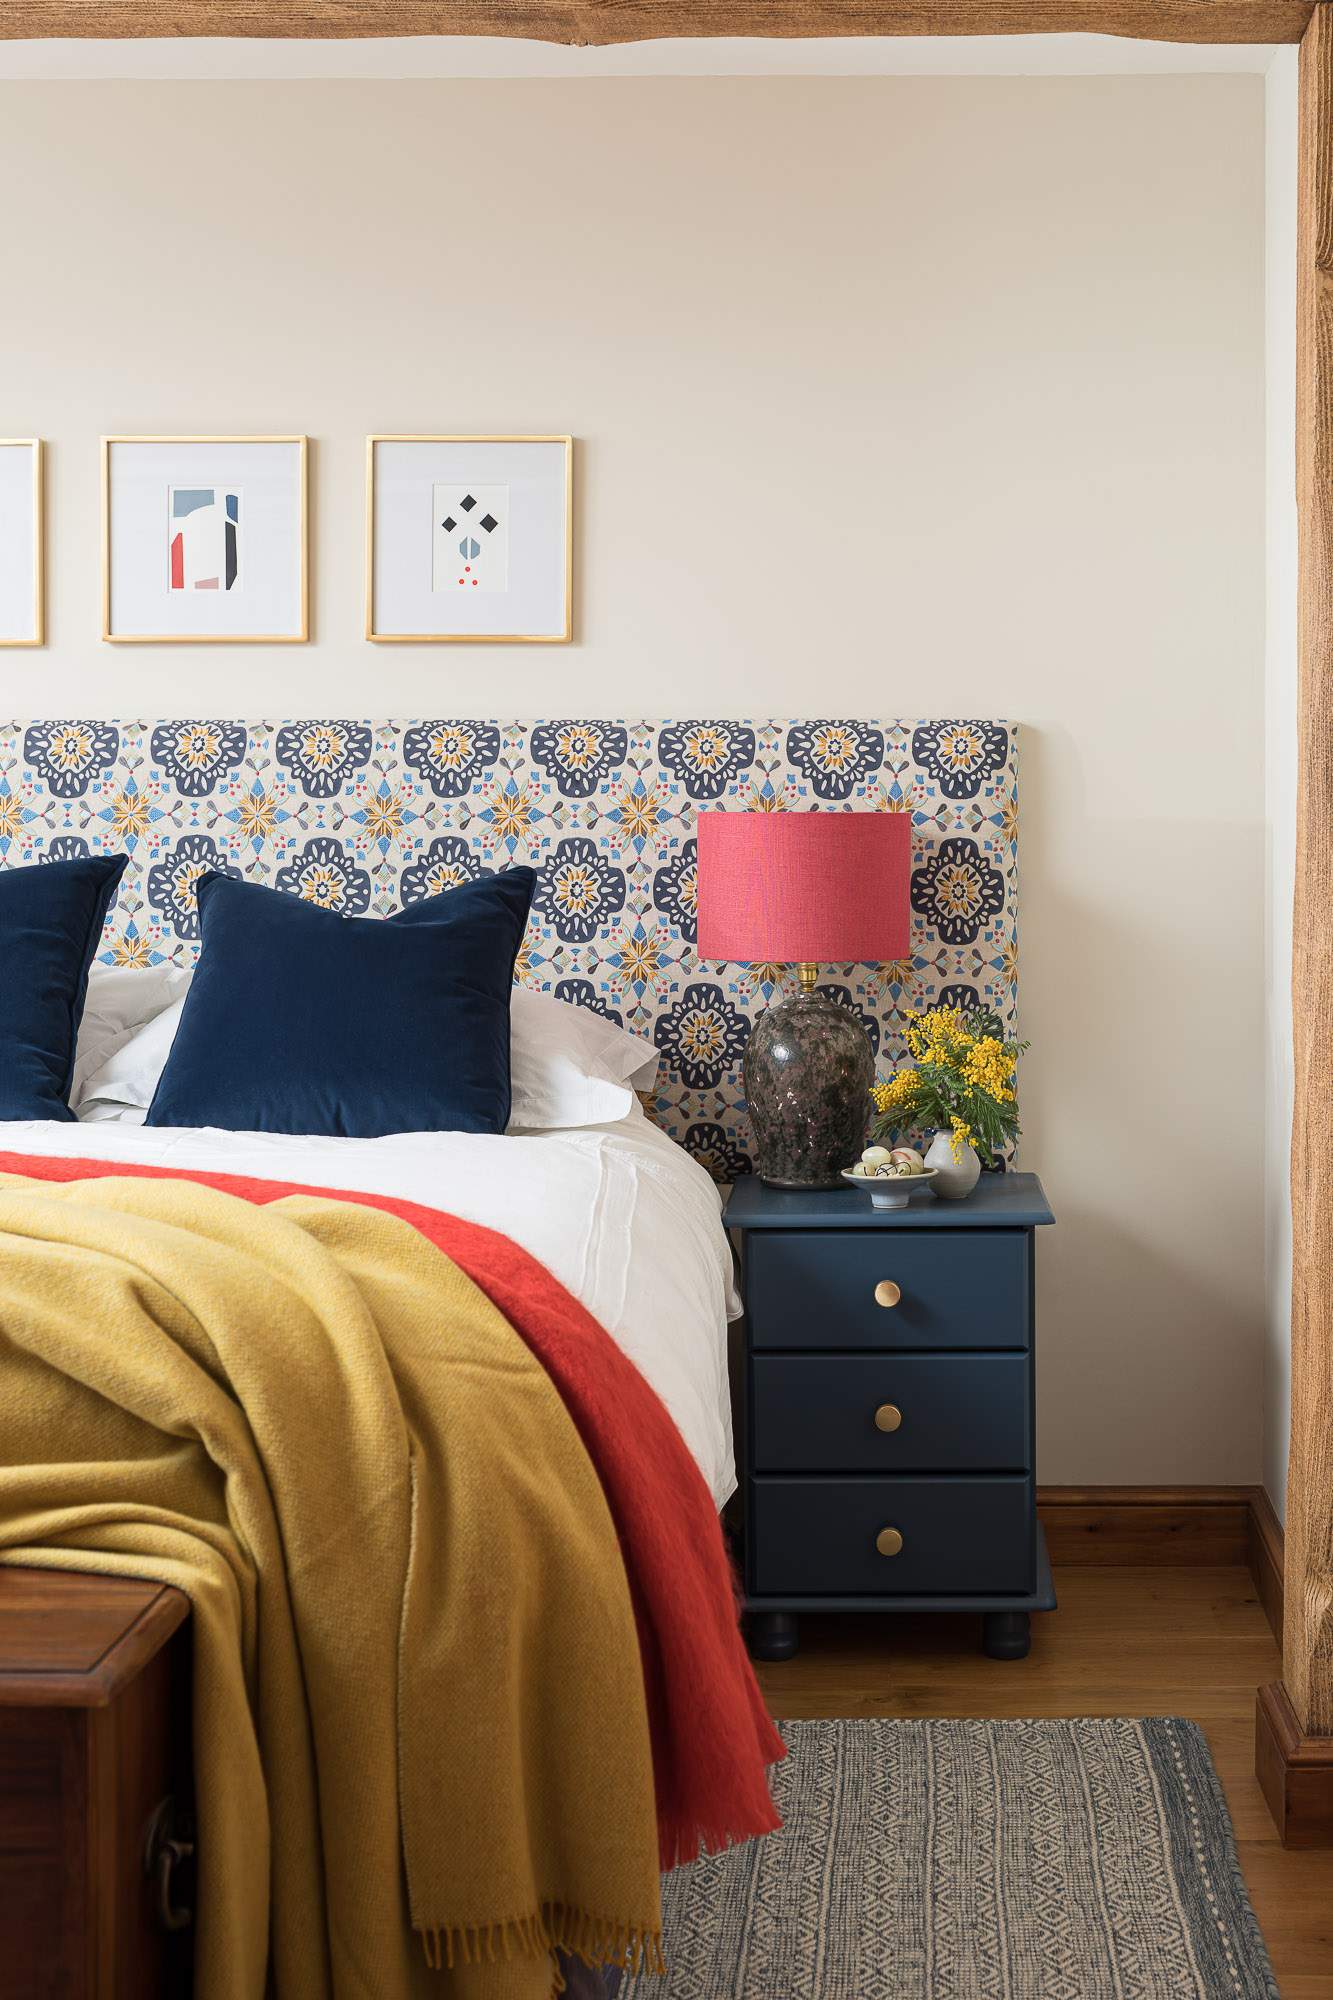 Bedroom with embroidered headboard